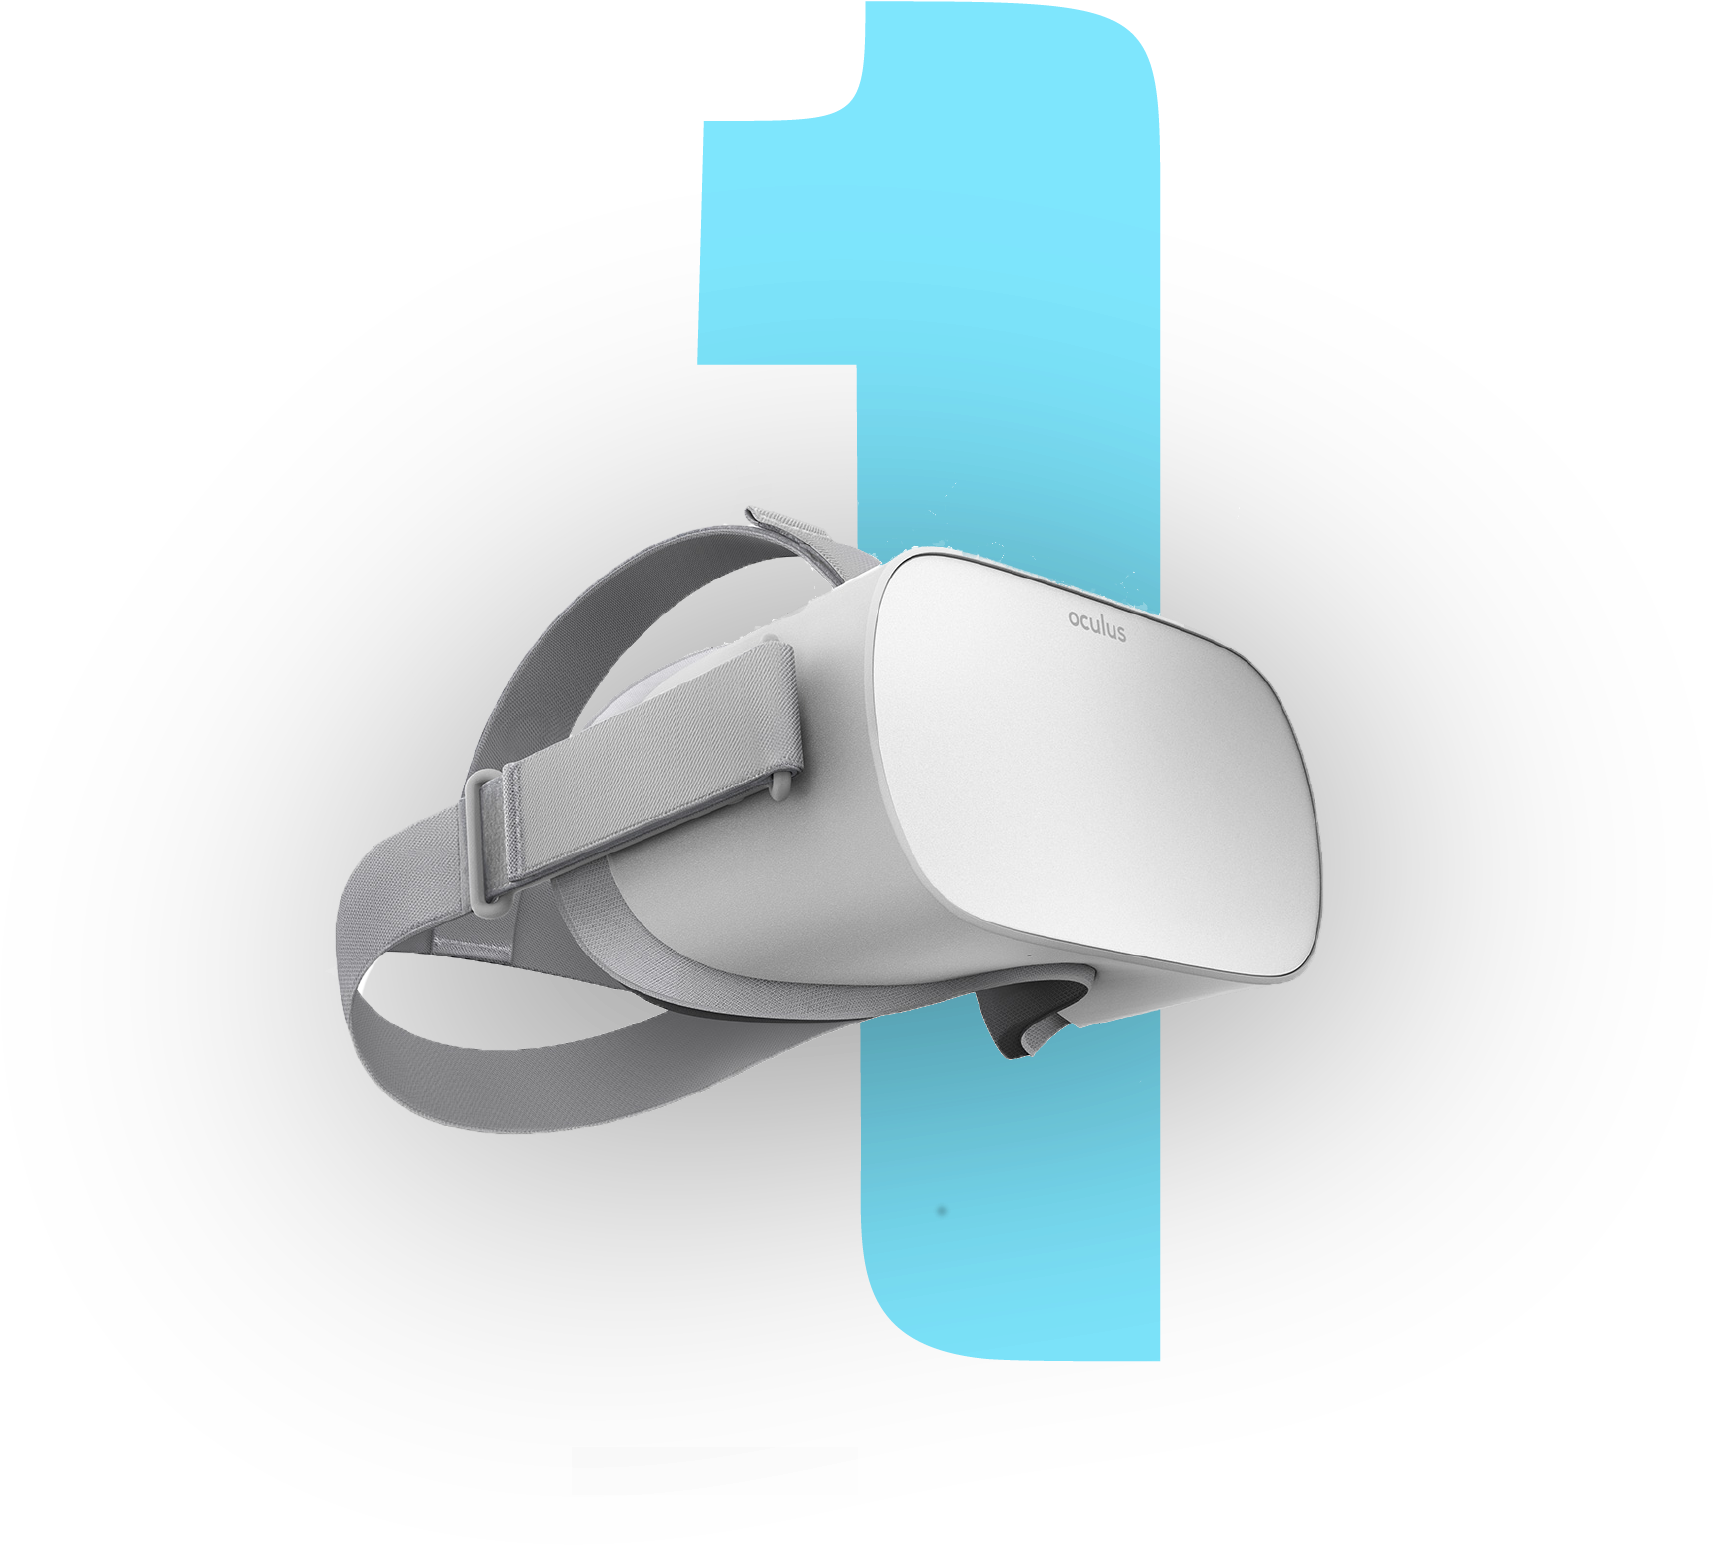 Buy An Oculus Go Or A Gear Vr Headset - Rear-view Mirror (2083x2083), Png Download